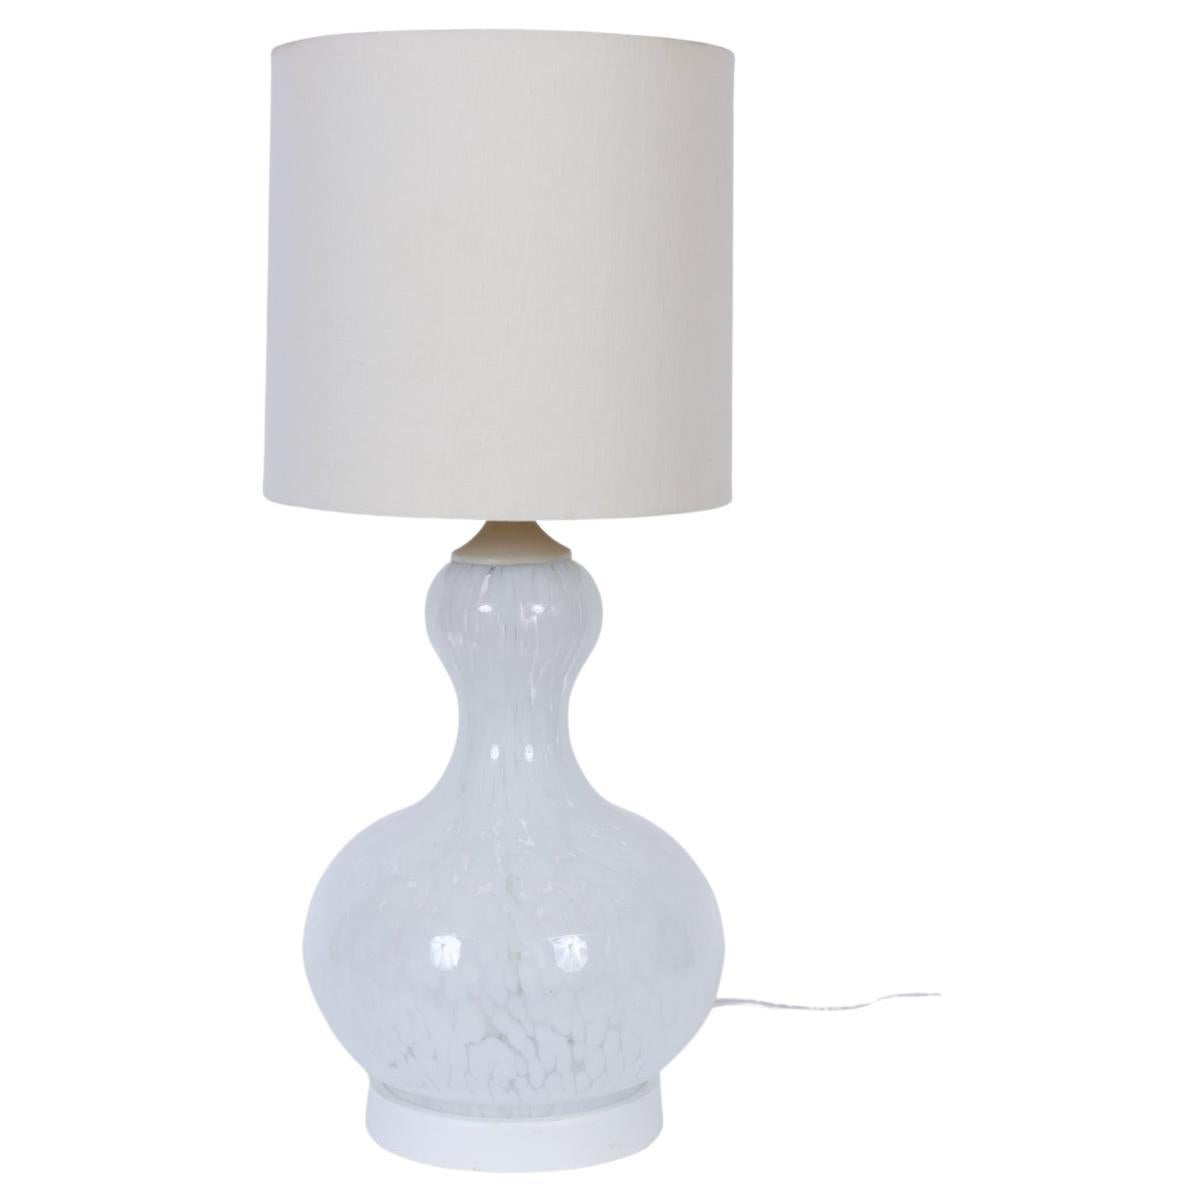 Substantial Carlo Nason for Mazzega White Murano Glass Table Lamp, C. 1970 For Sale 5